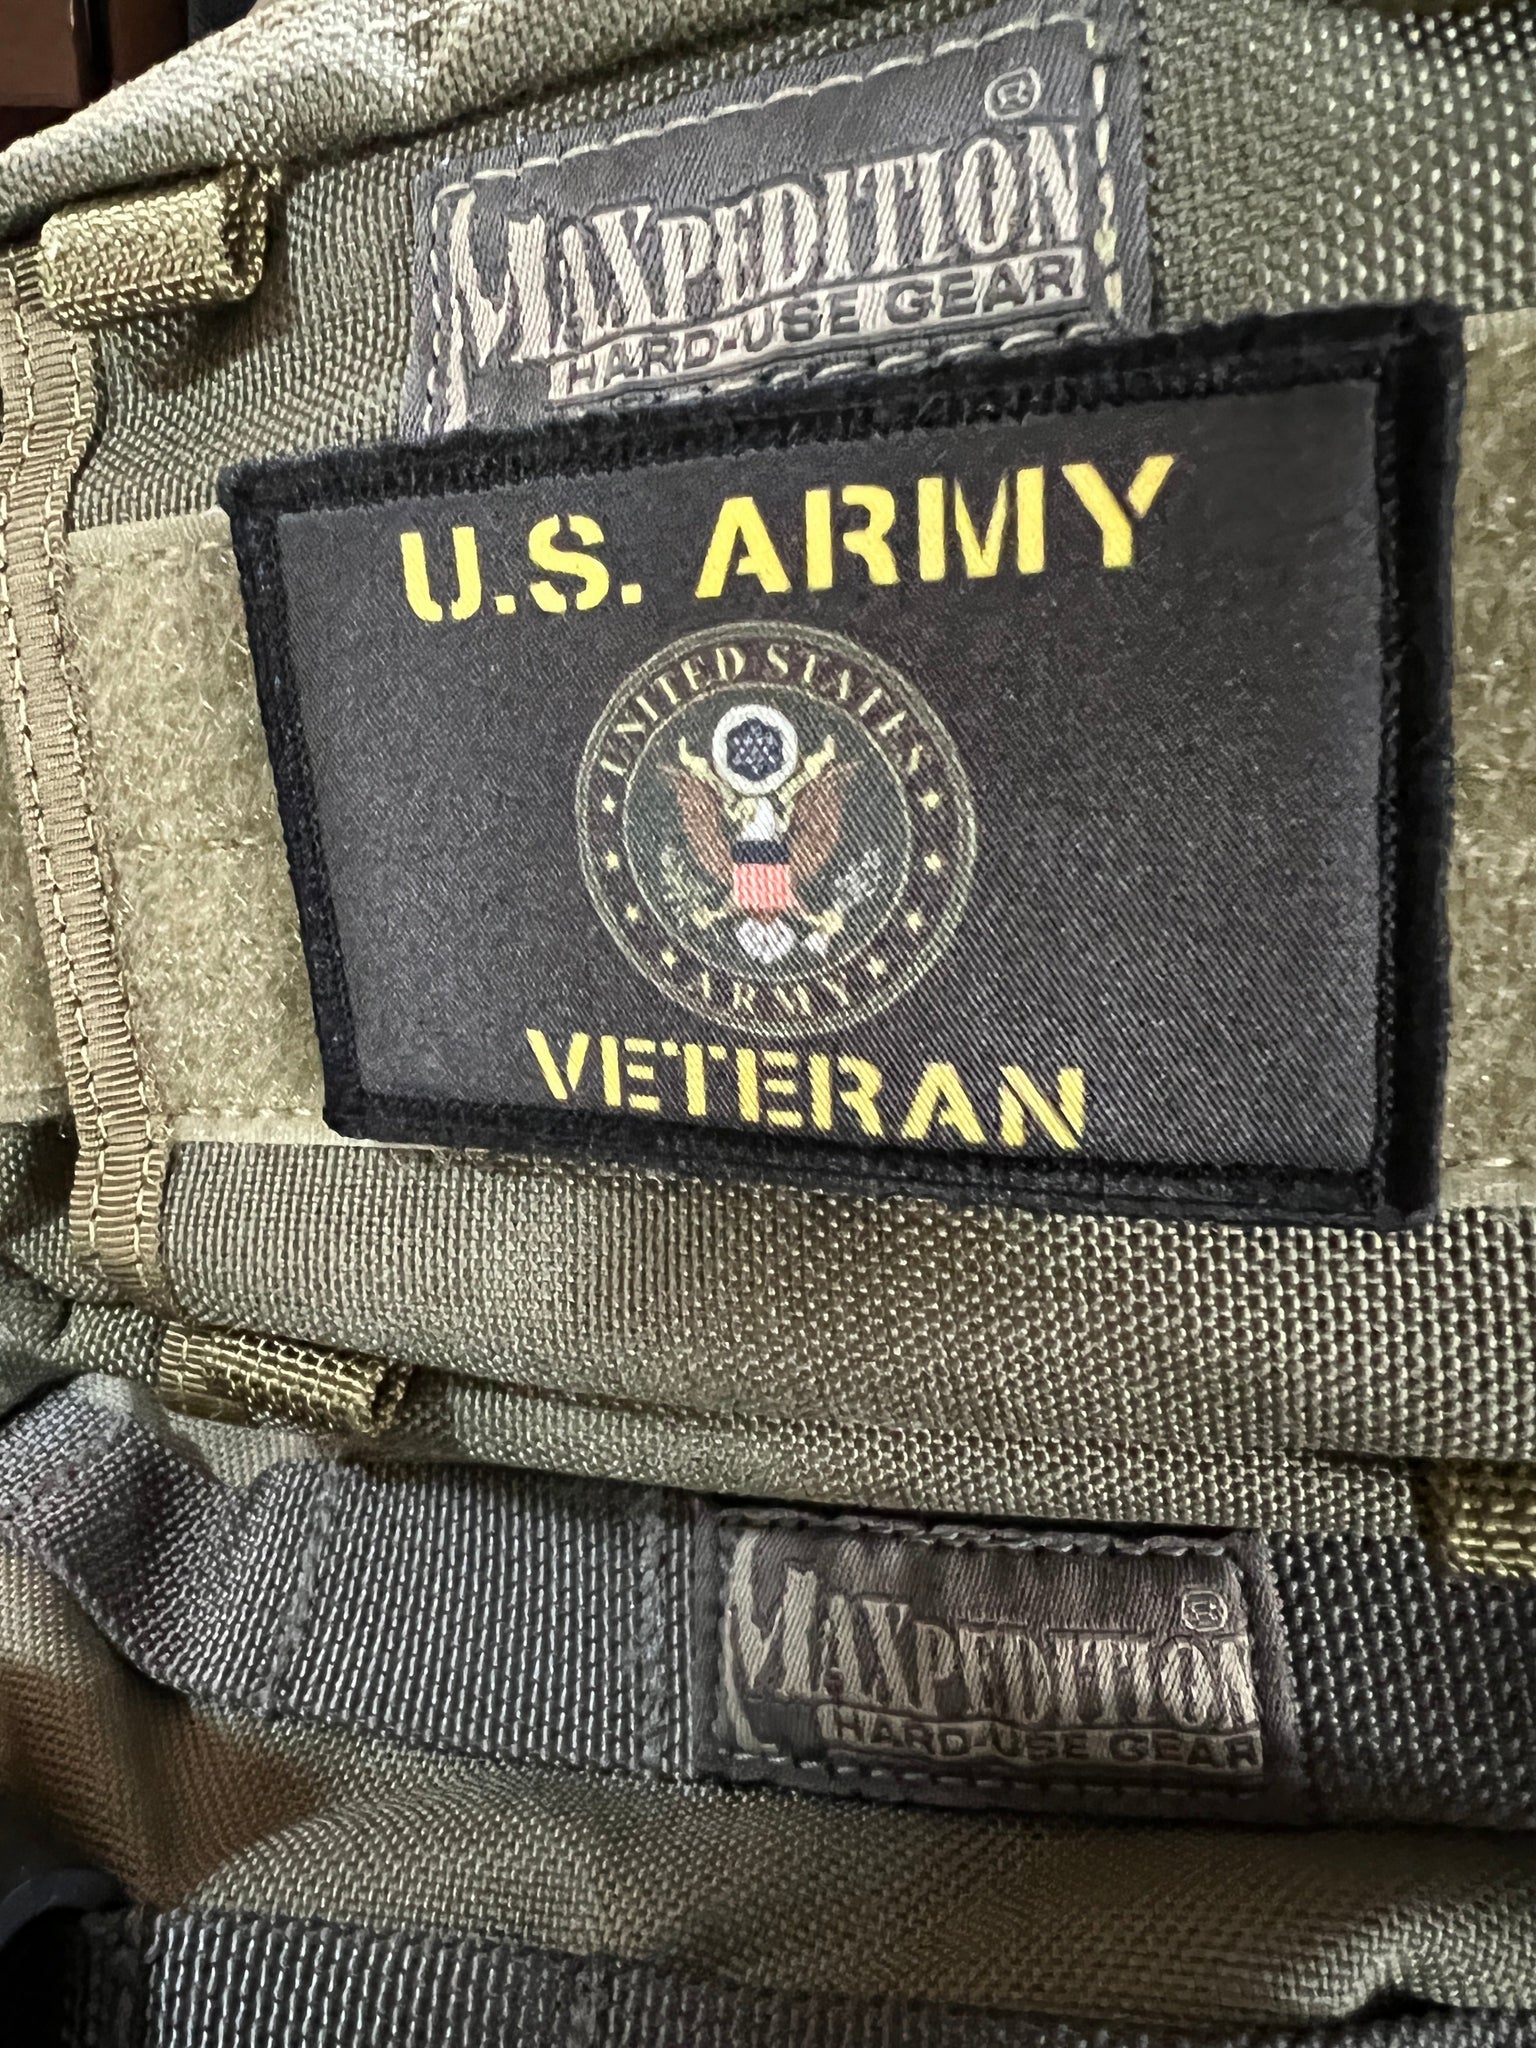 US ARMY Veteran Morale Patch  Custom Velcro Morale Patches